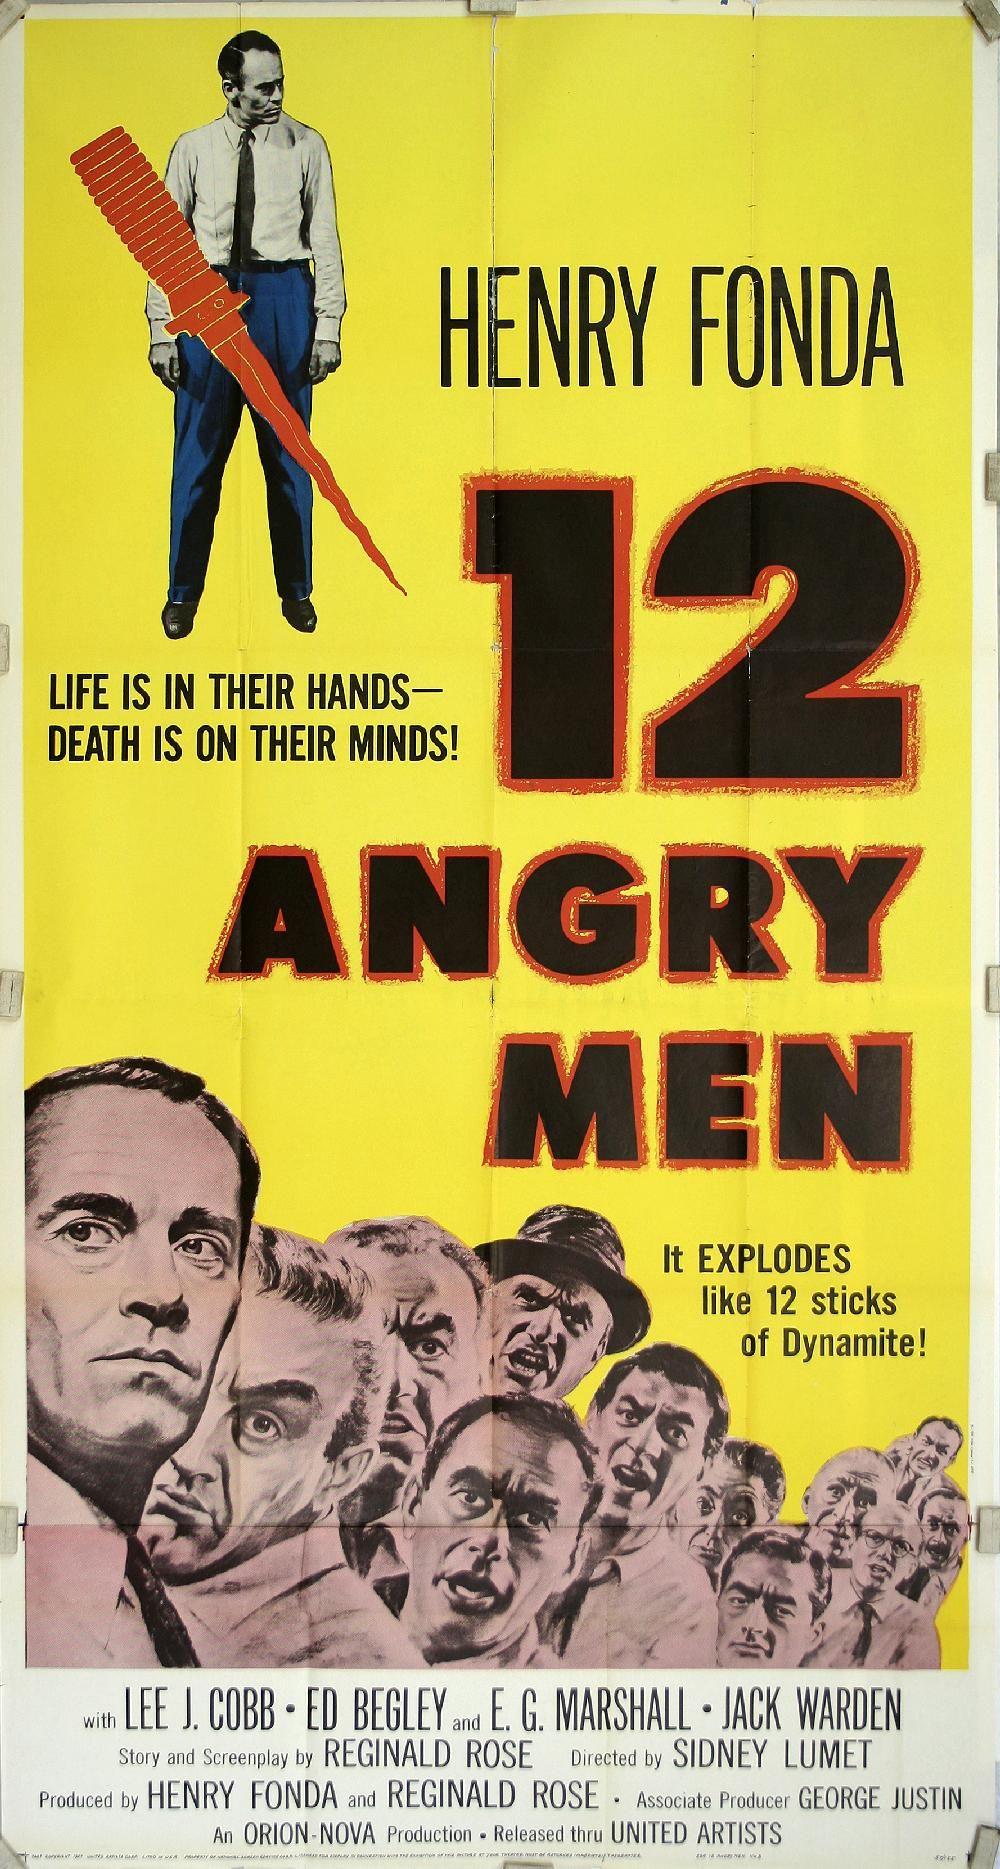 Angry Men”